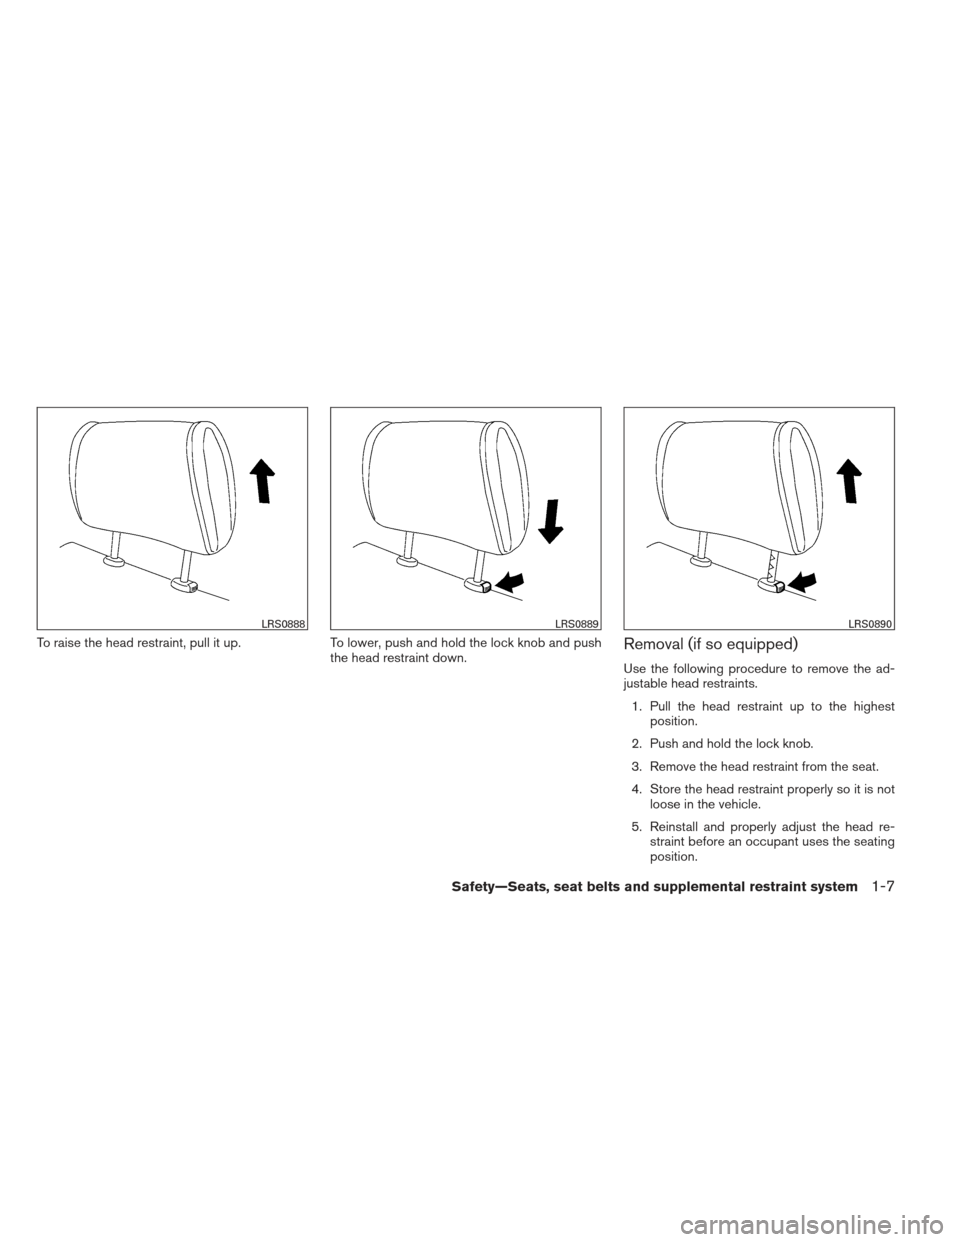 NISSAN VERSA SEDAN 2013 2.G Owners Manual To raise the head restraint, pull it up.To lower, push and hold the lock knob and push
the head restraint down.Removal (if so equipped)
Use the following procedure to remove the ad-
justable head rest